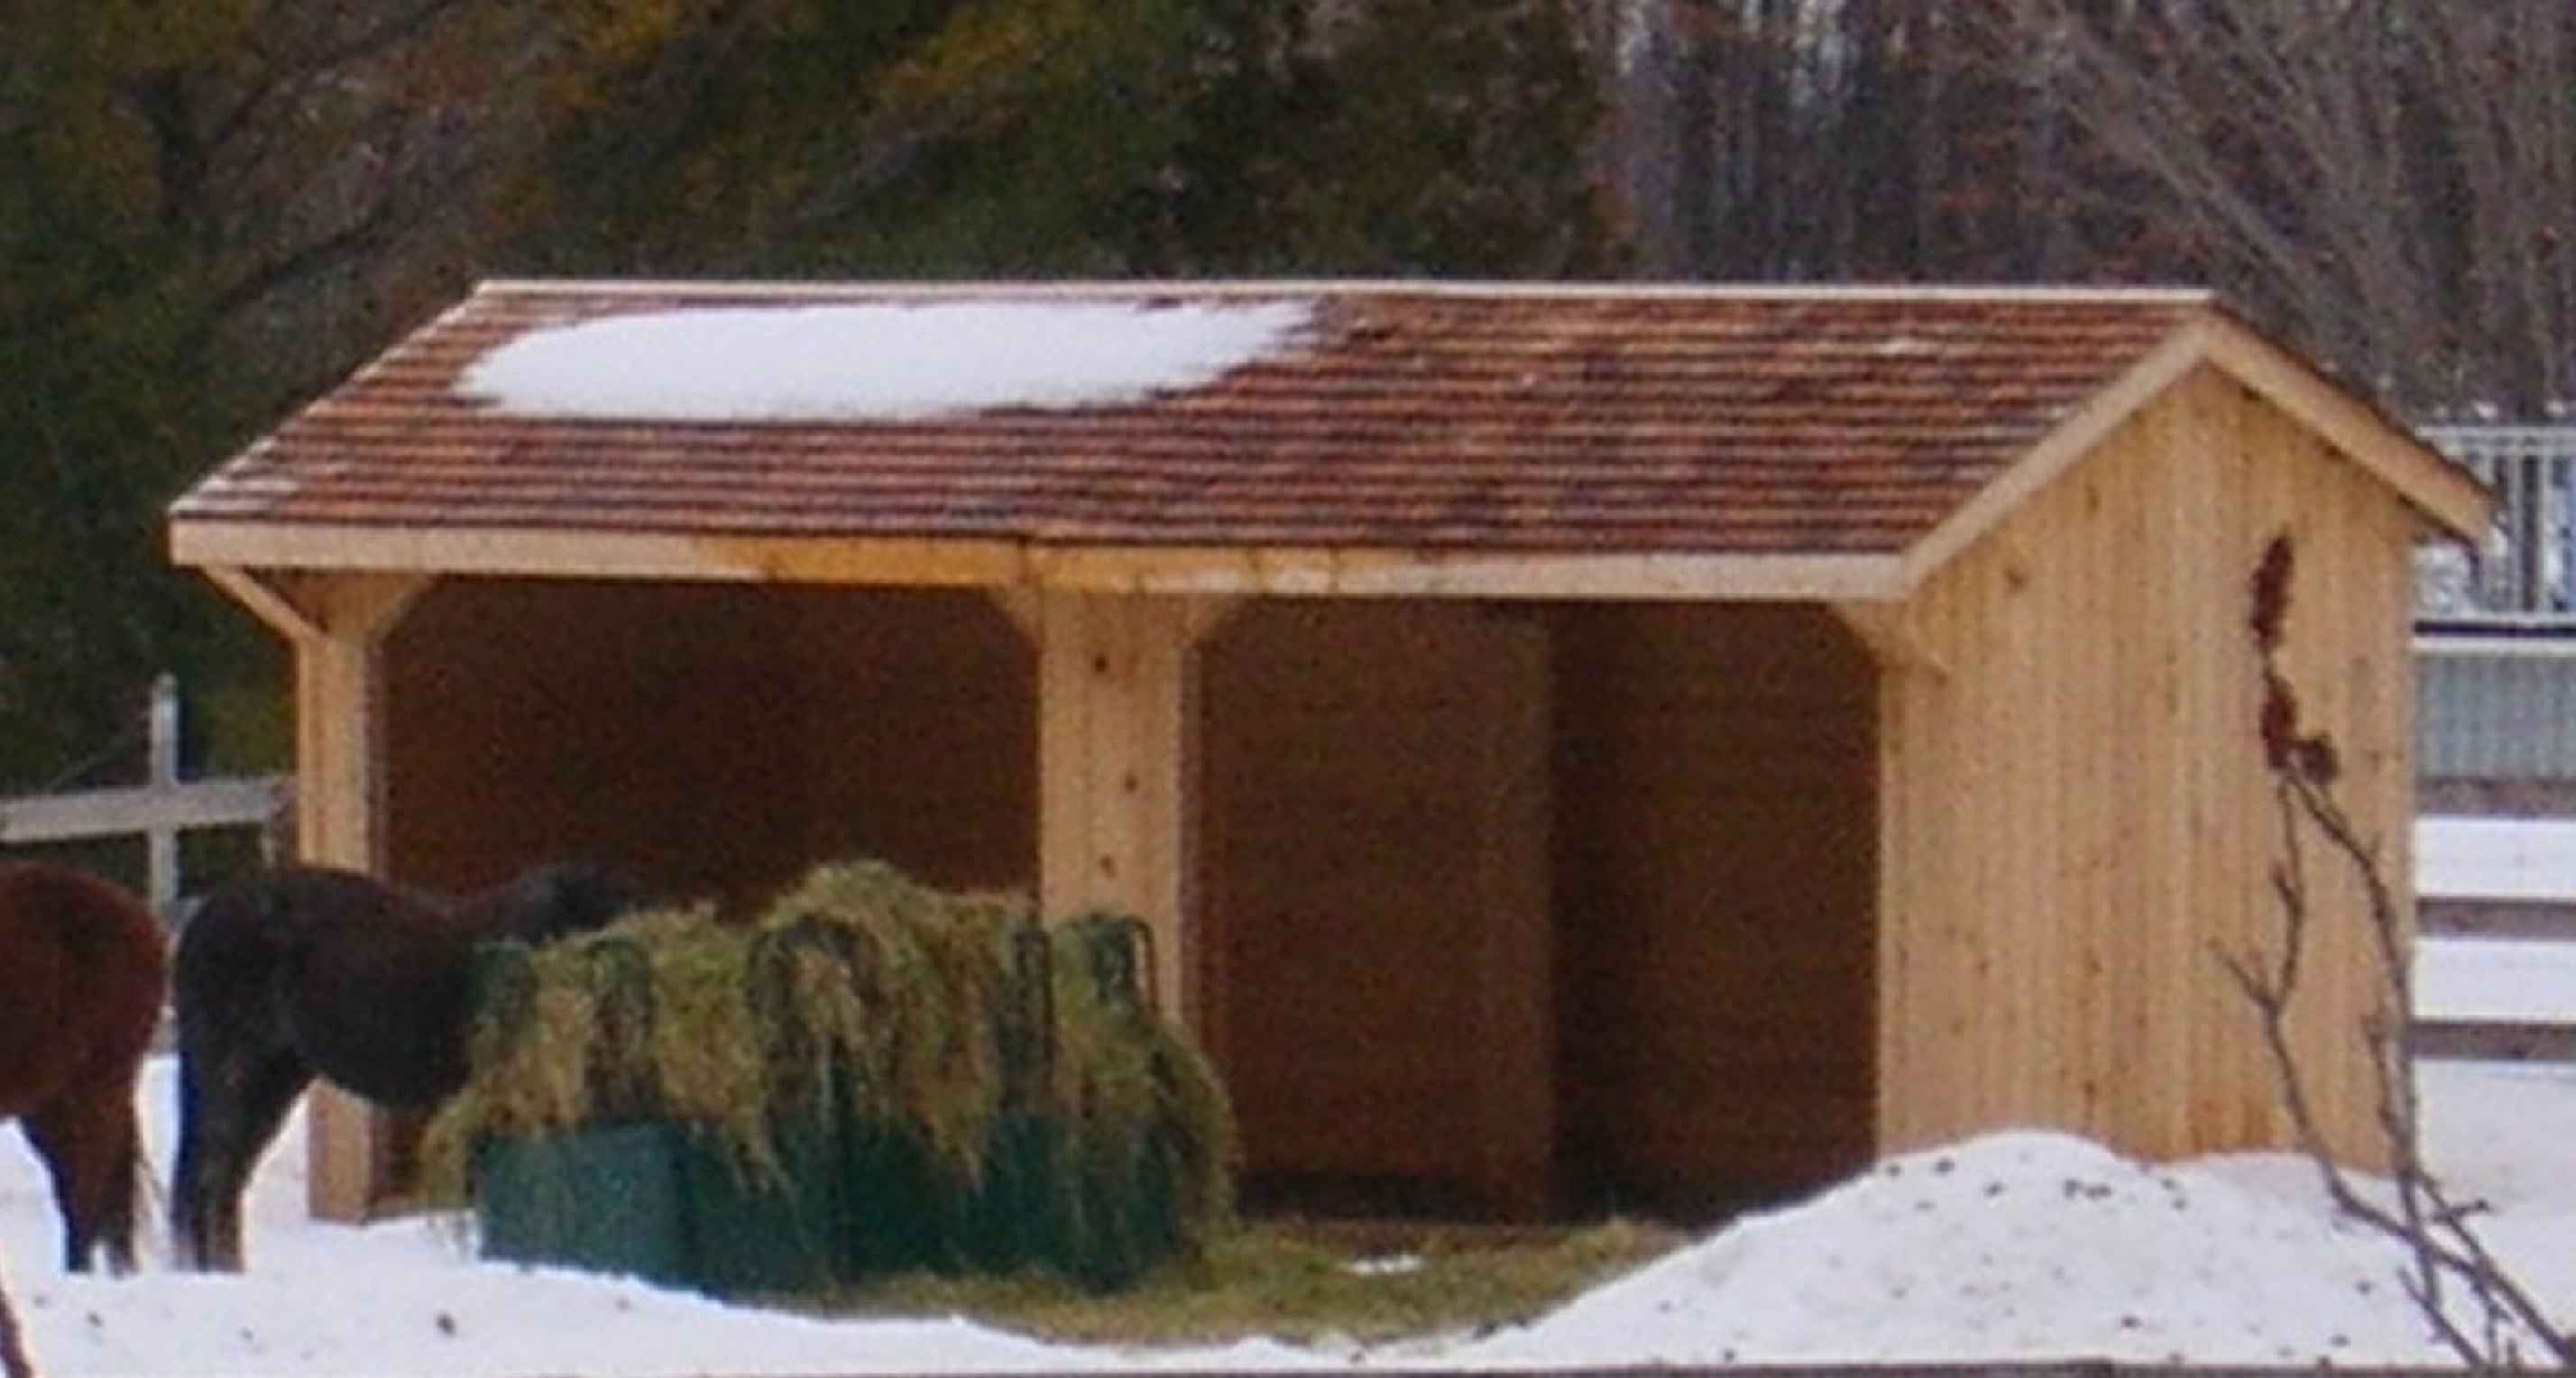 shed plans 201305